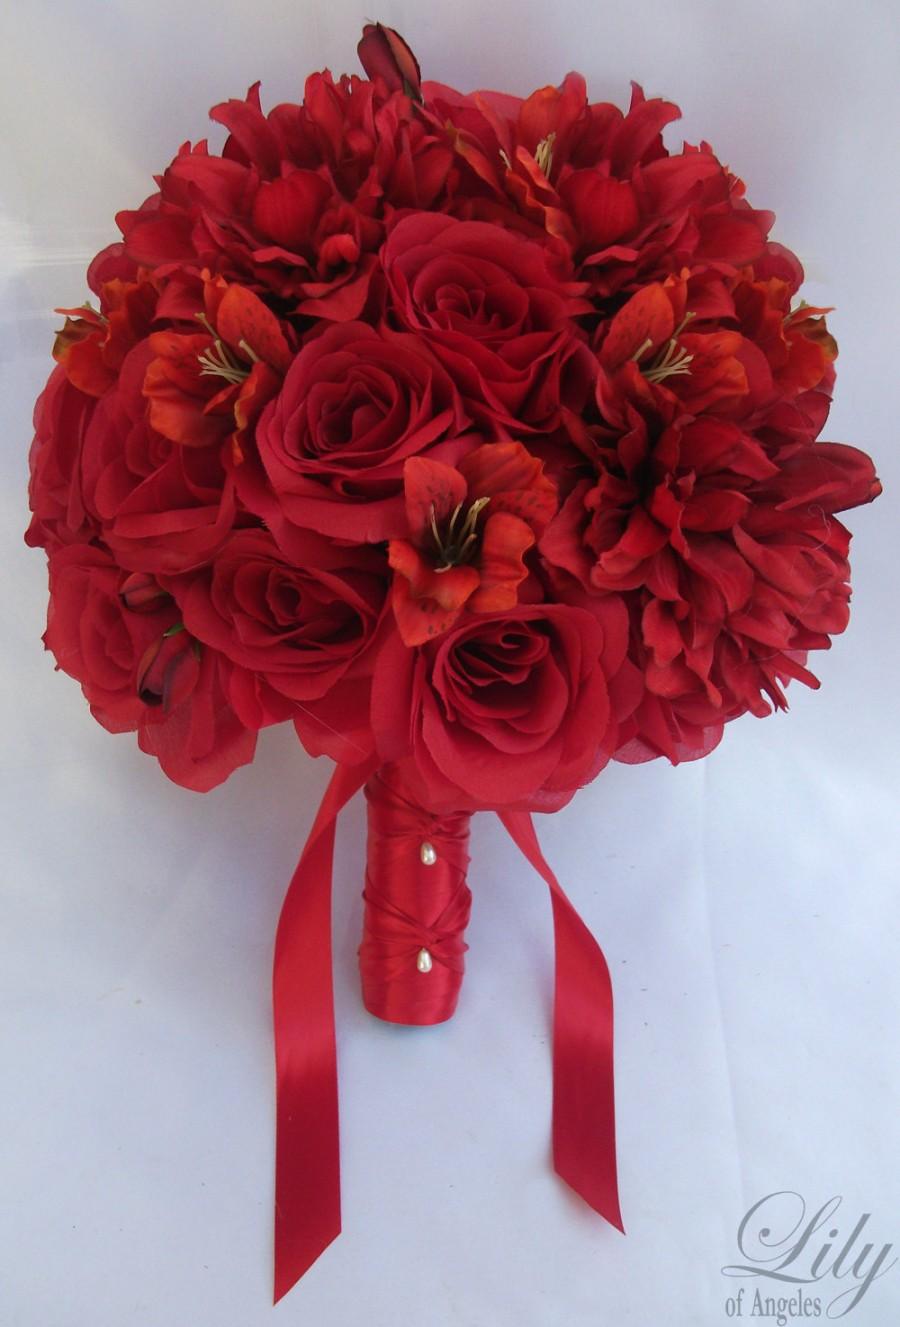 Wedding - 17 Piece Package Wedding Bridal Bride Maid Of Honor Bridesmaid Bouquet Boutonniere Corsage Silk Flower APPLE RED "Lily of Angeles" RERE03